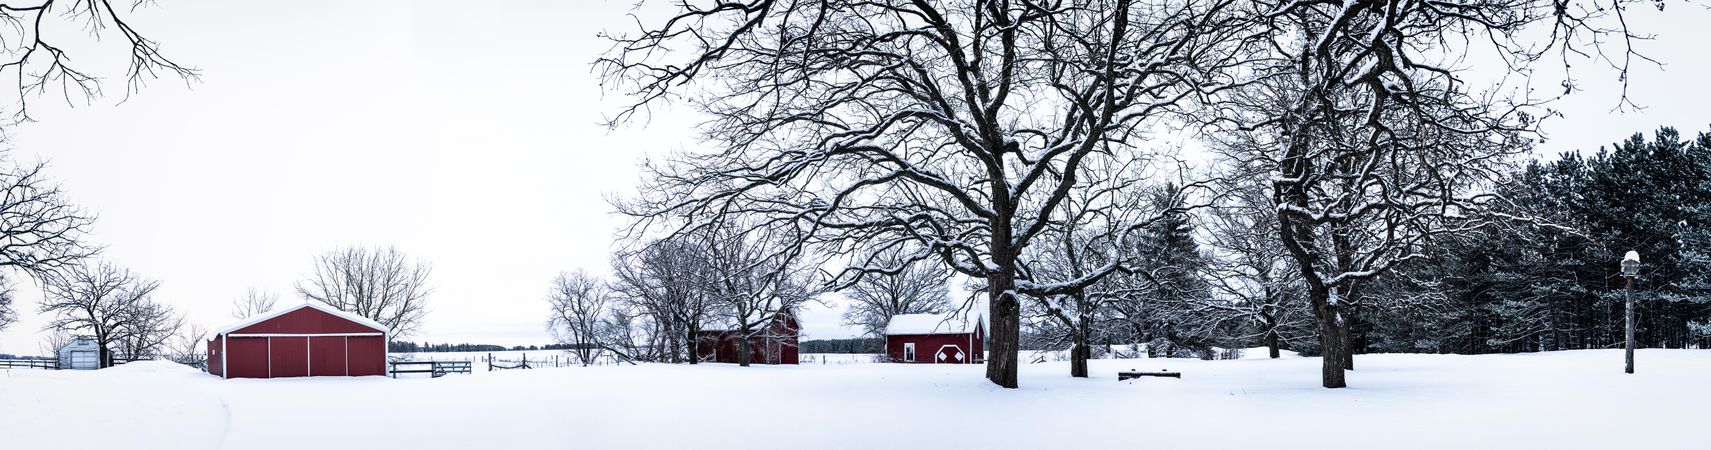 Winter day at the farm